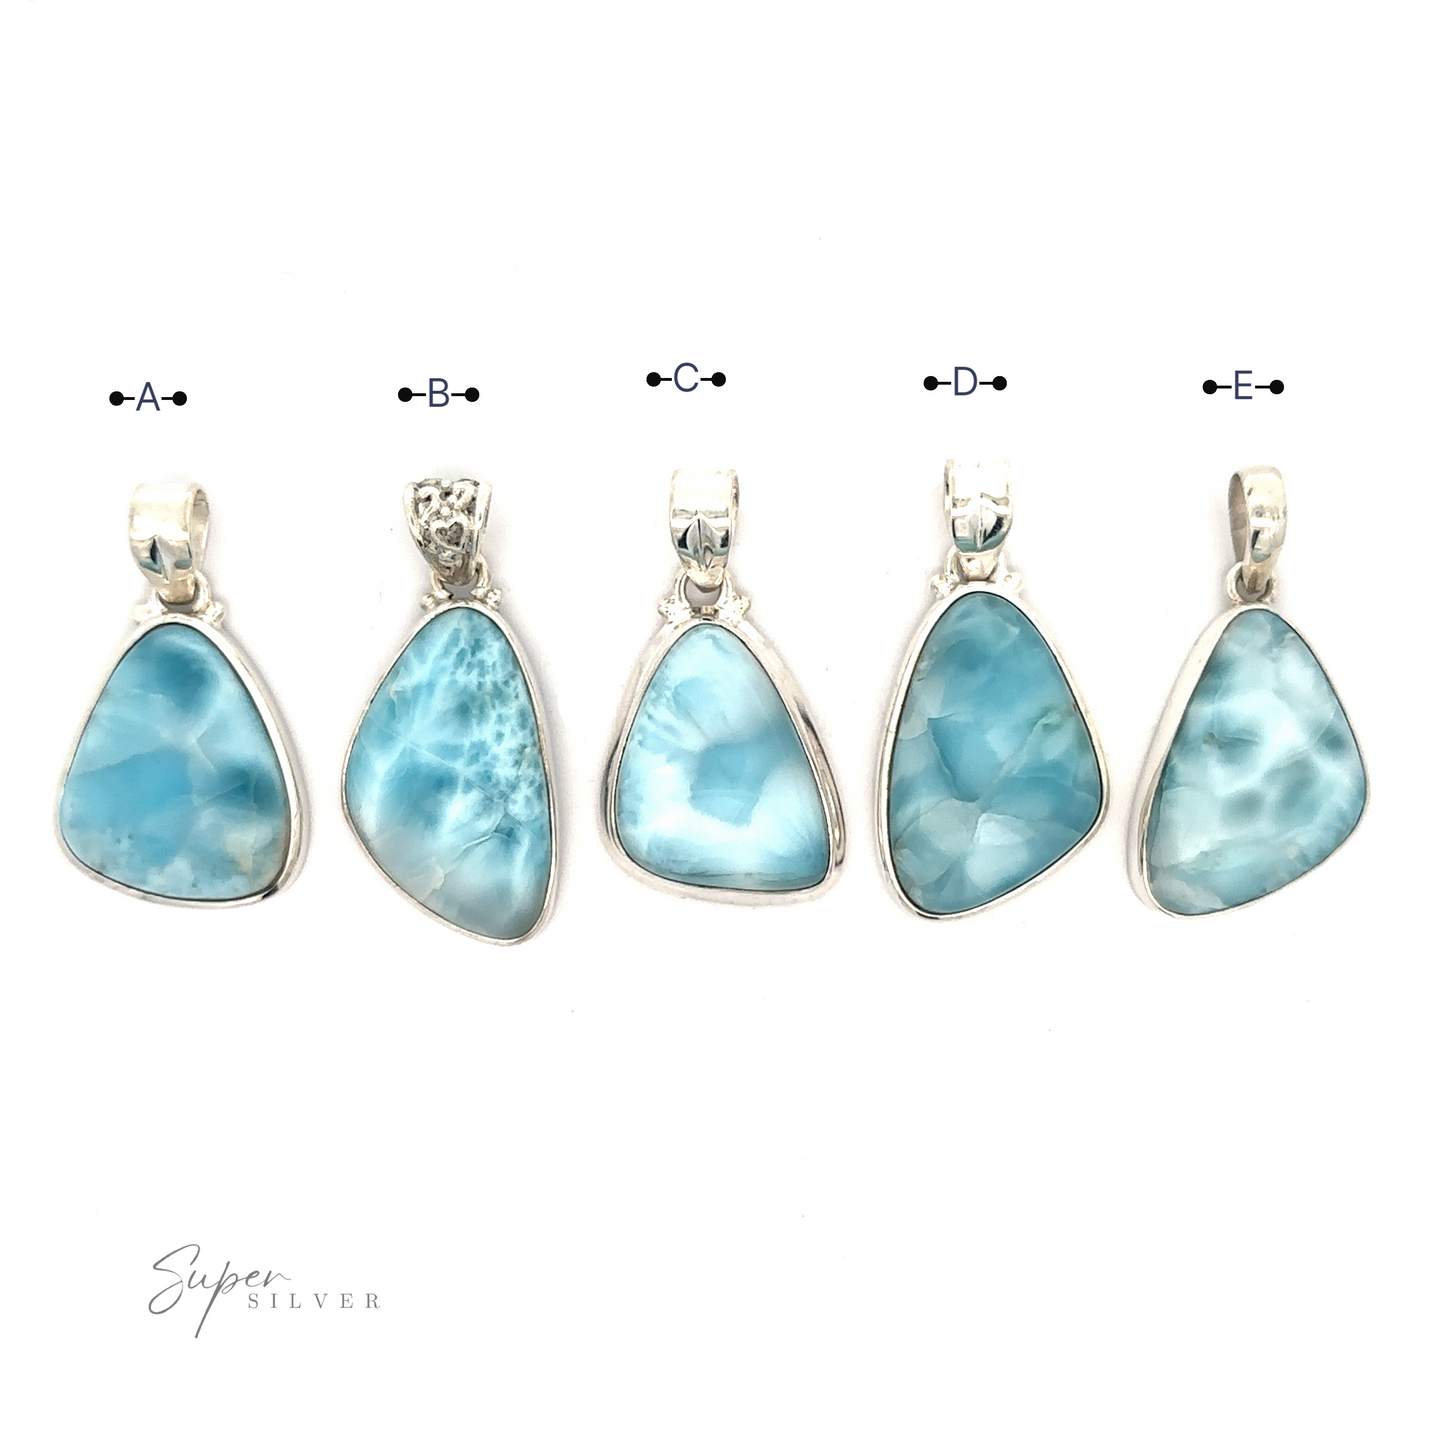 Five blue Freeform Shape Larimar Pendants labeled A to E, each set in a sterling silver frame. The stones vary slightly in shape and pattern. The background is plain white with the text "Super Silver" in the bottom left corner. Chain not included.